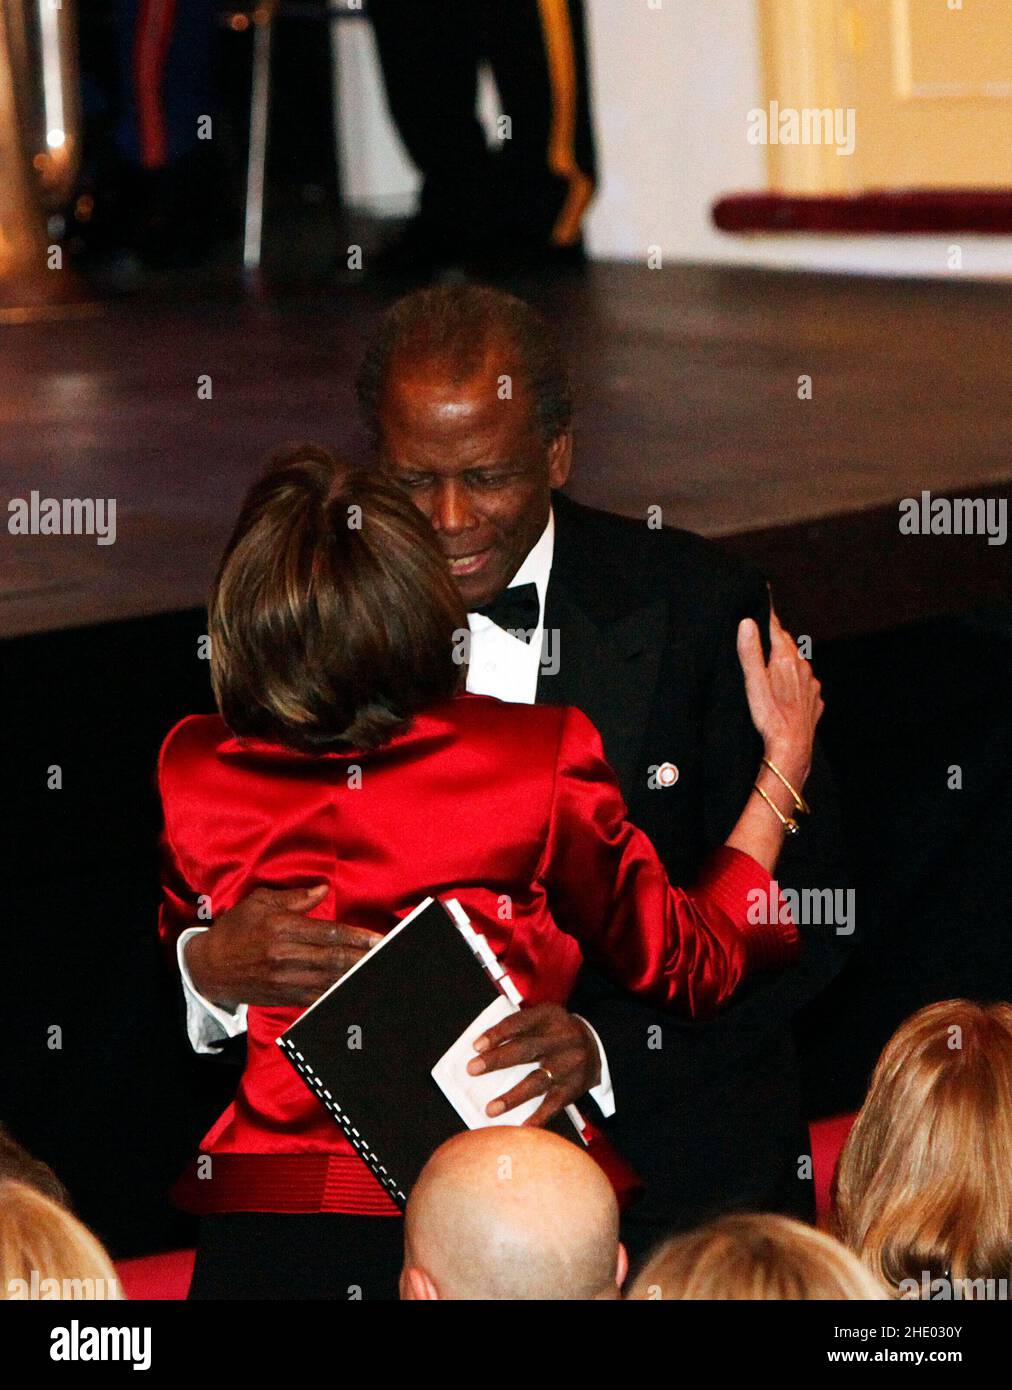 Washington, DC - February 11, 2009 -- United States Speaker of the House Nancy Pelosi (Democrat of California), greets actor Sydney Poitier at the Ford's Theater reopening celebration, Washington, DC, Wednesday, February 11, 2009. The theater underwent an 18 month renovation.Credit: Aude Guerrucci - Pool via CNP Stock Photo